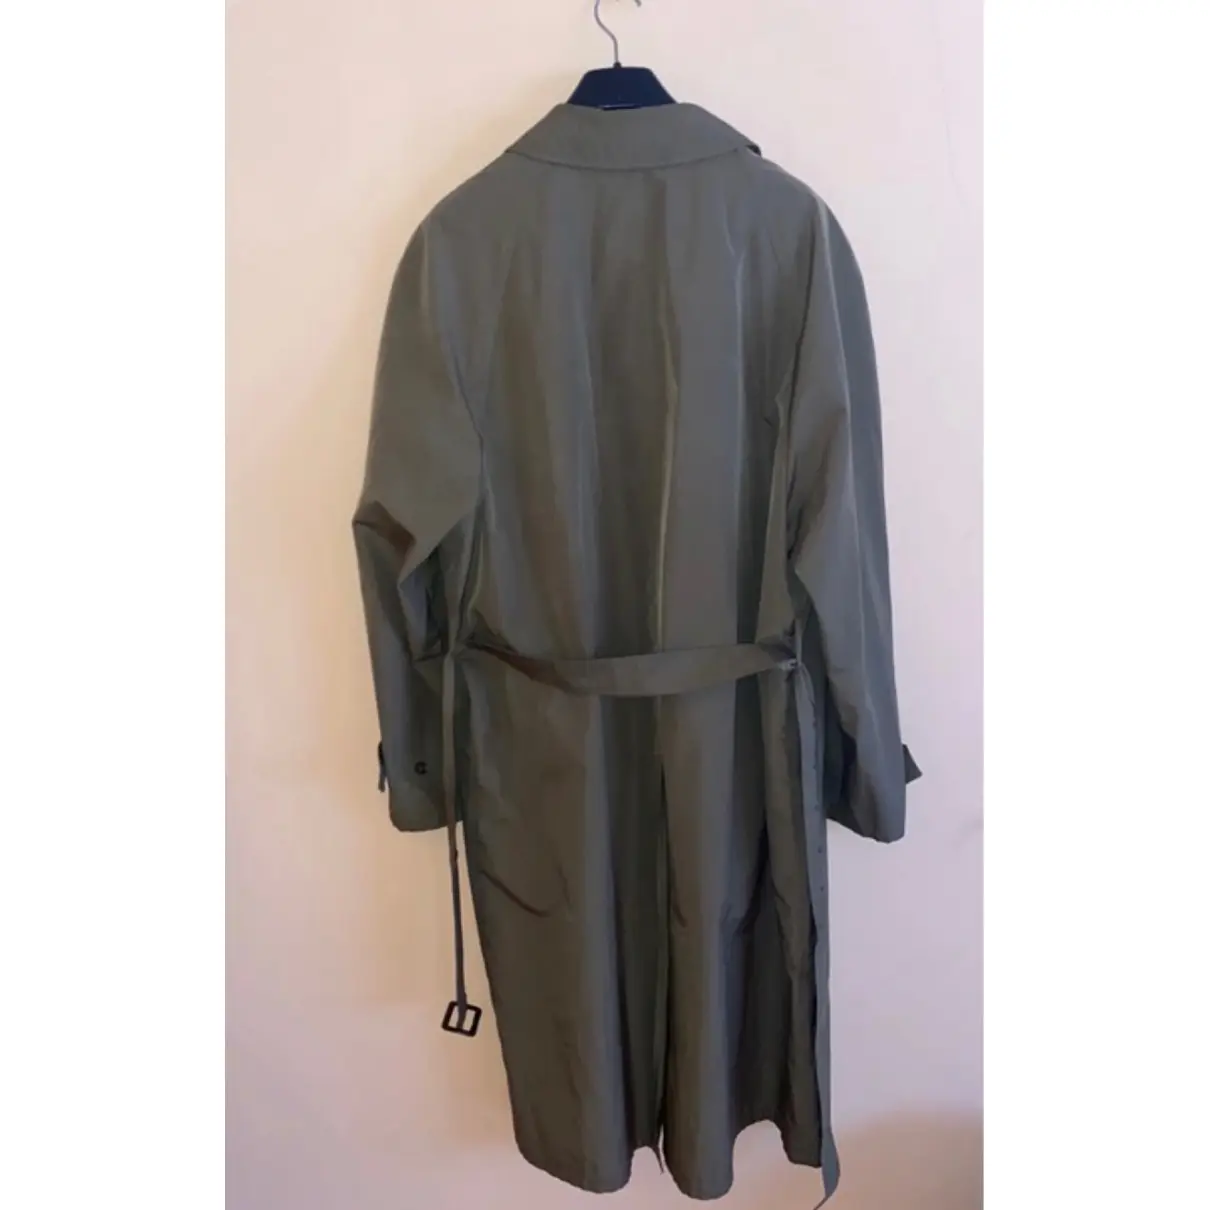 Buy Burberry Trench online